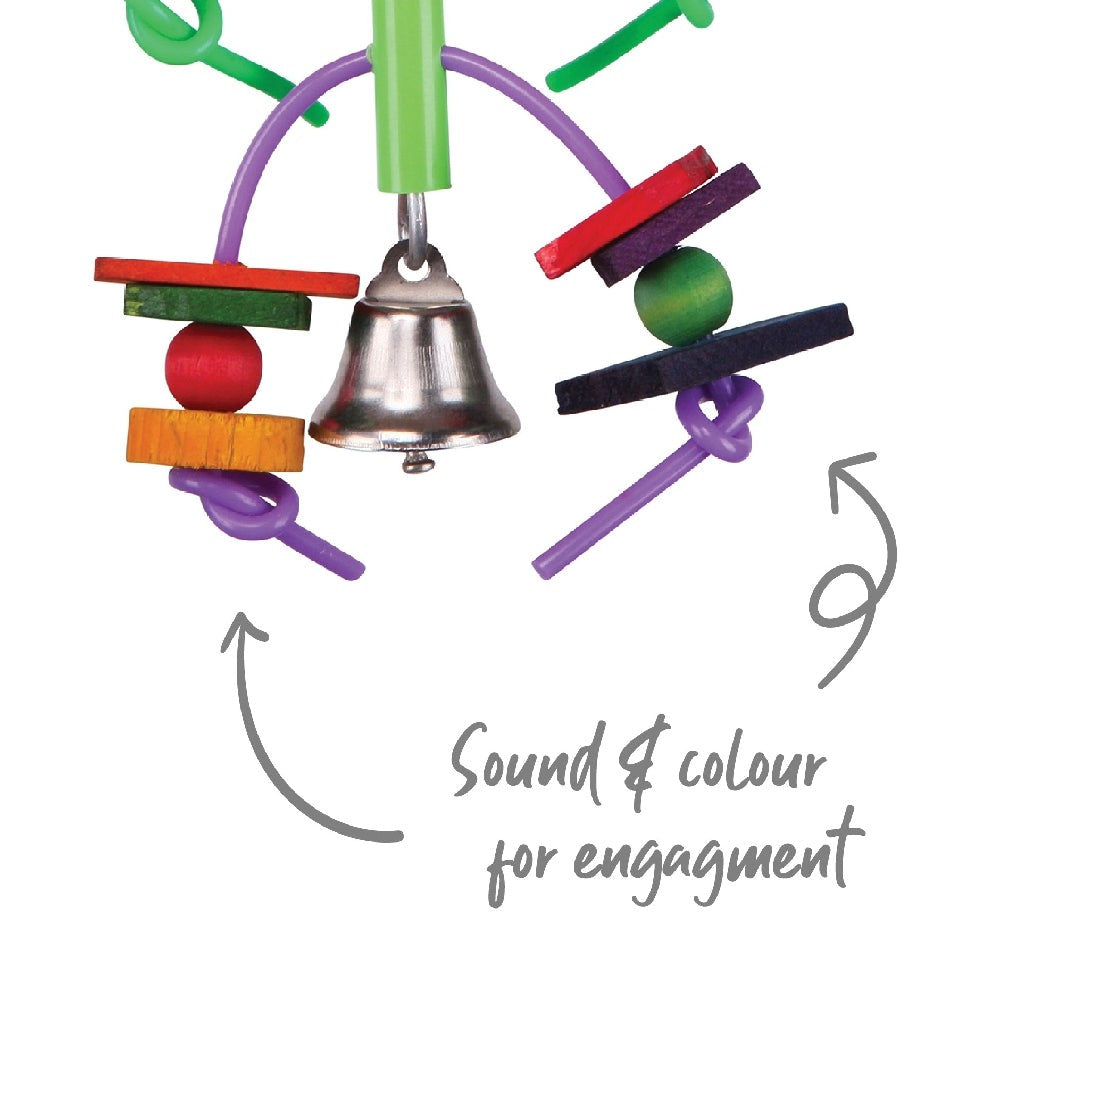 Colorful bird toy with bell and beads, designed for sensory engagement.